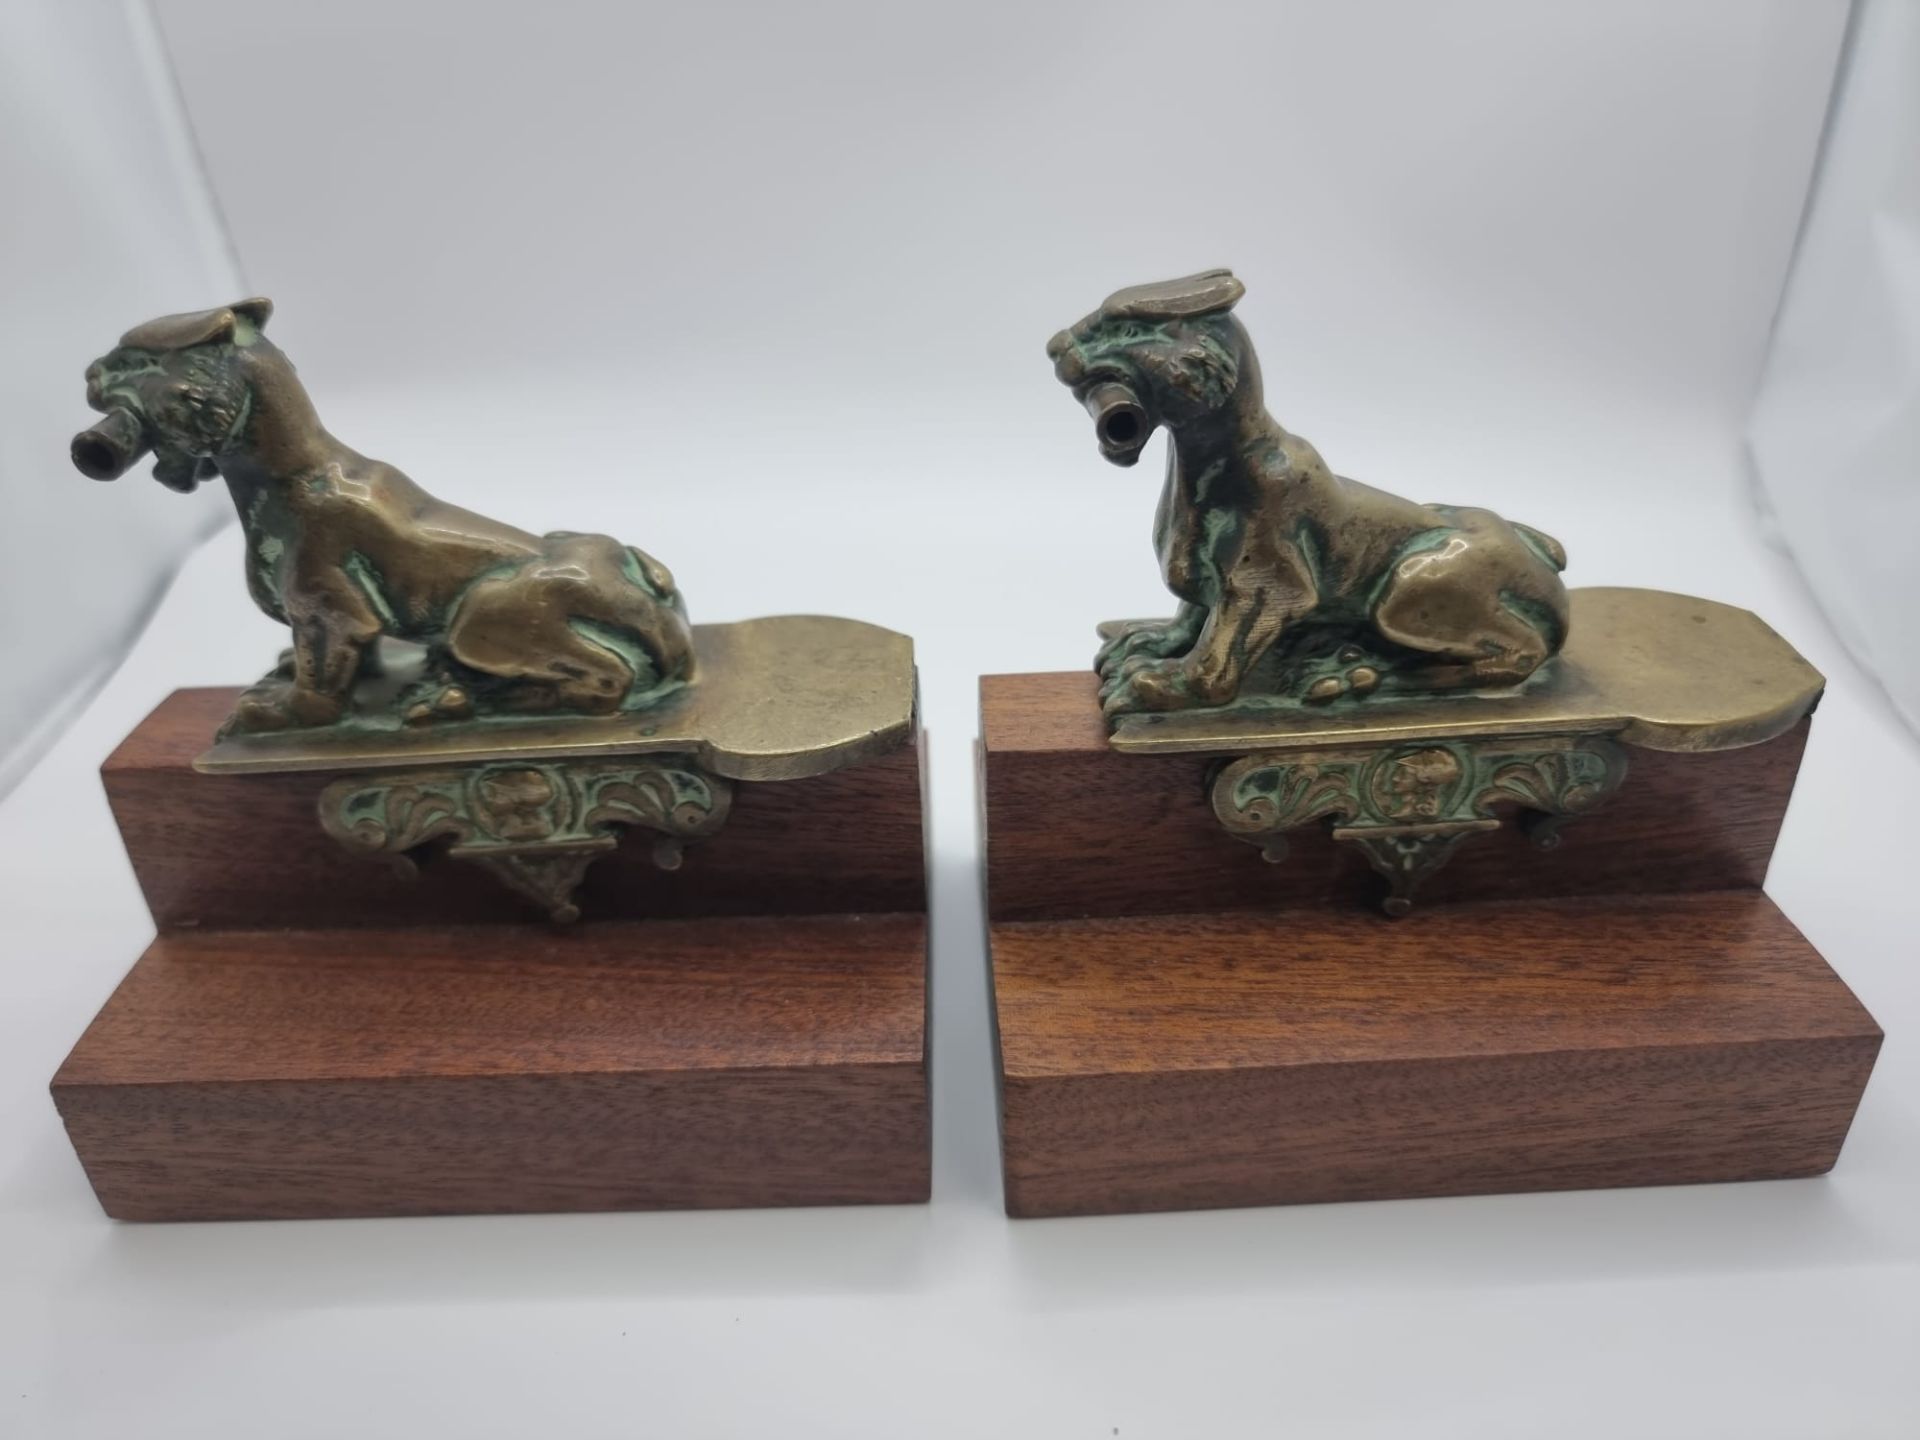 Pair Of 19th Century Decorative Bronze Lions later added to wooden plinth thus converted as Bookends